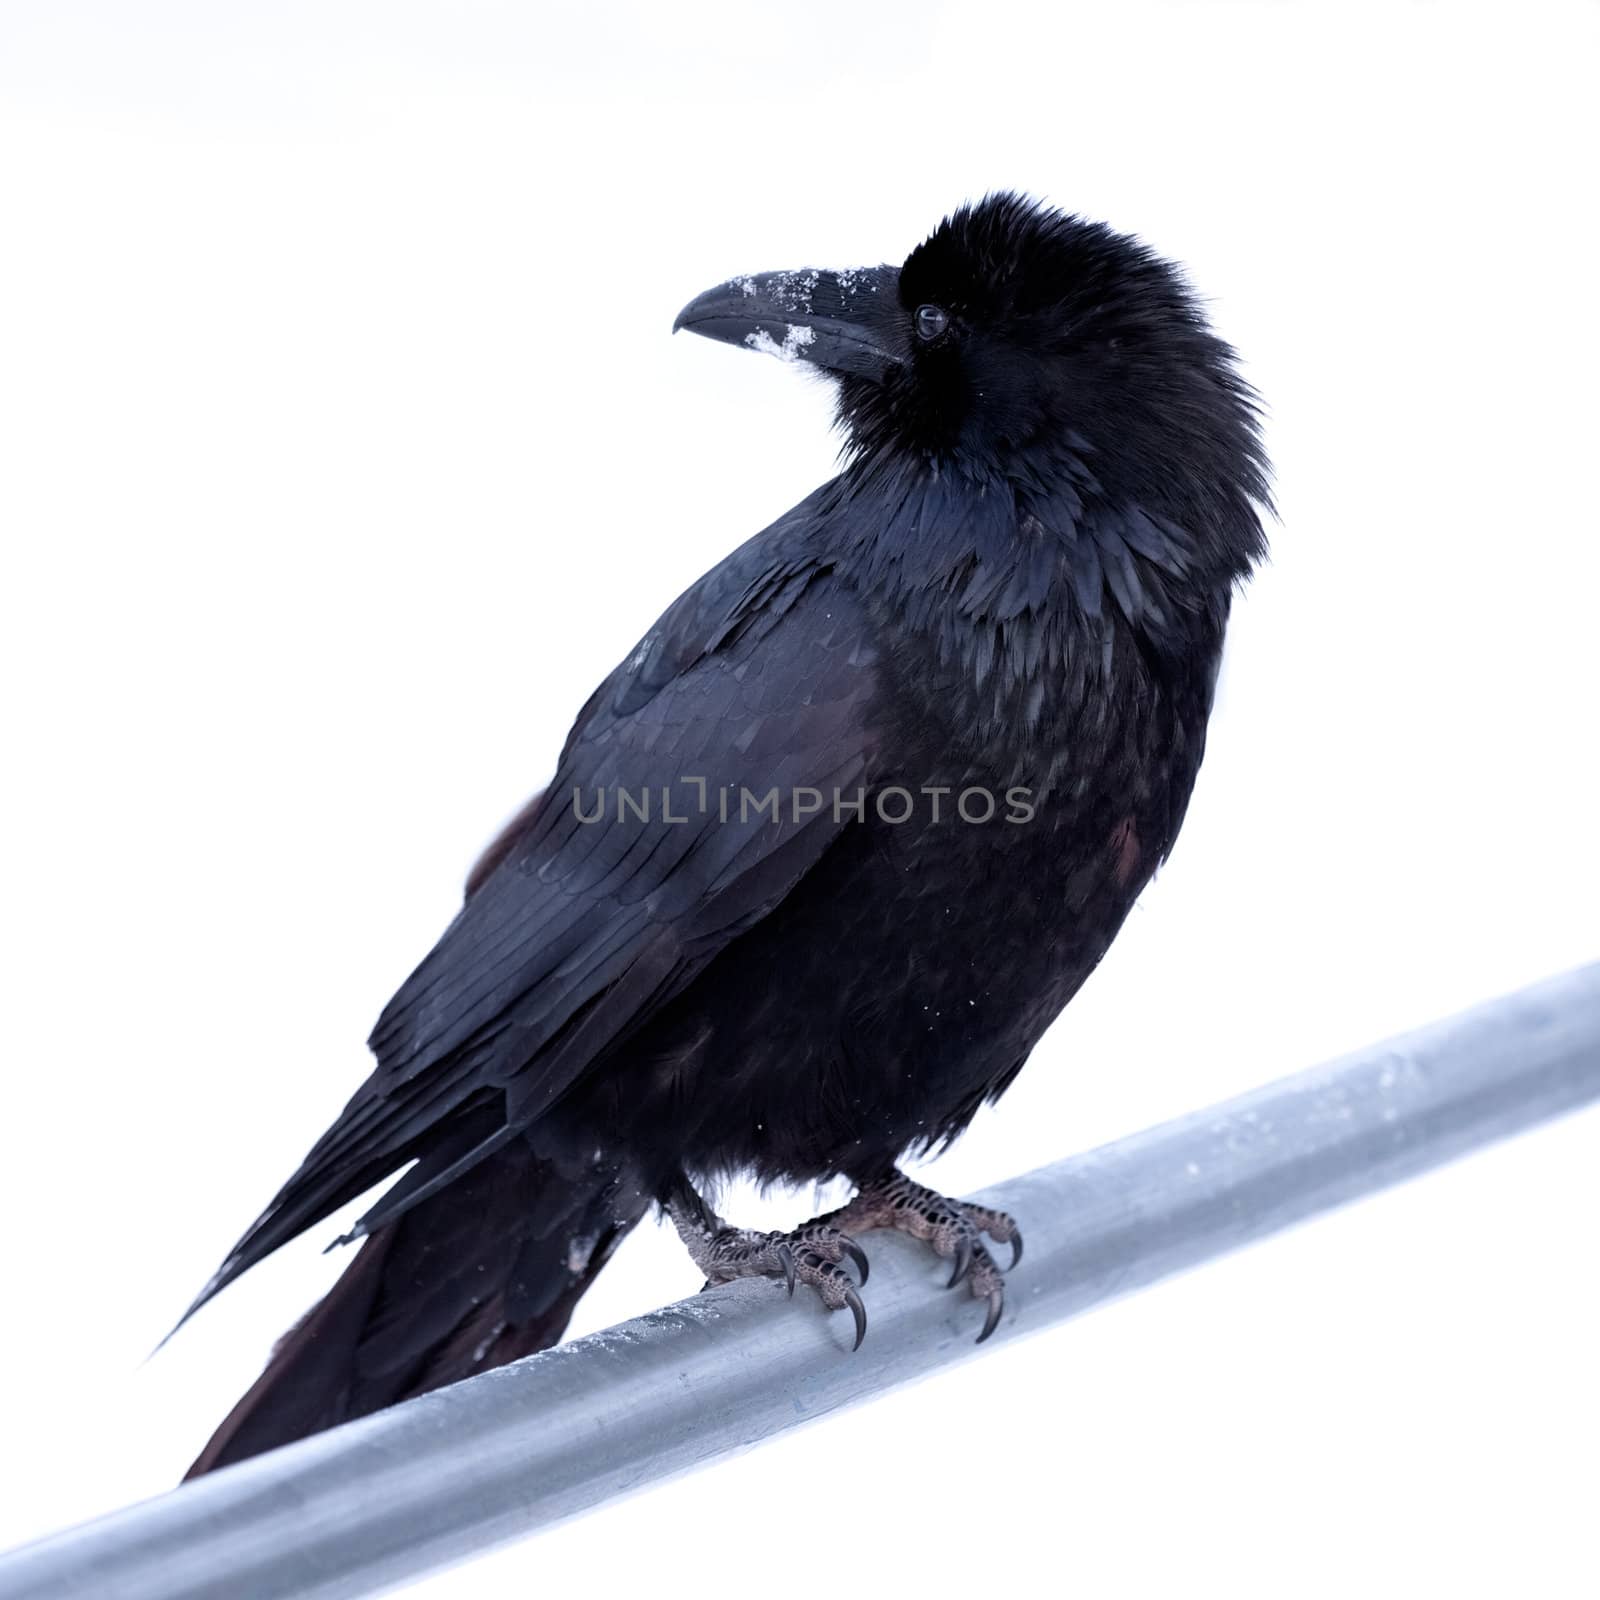 Common Raven Corvus corax perched on metal bar by PiLens